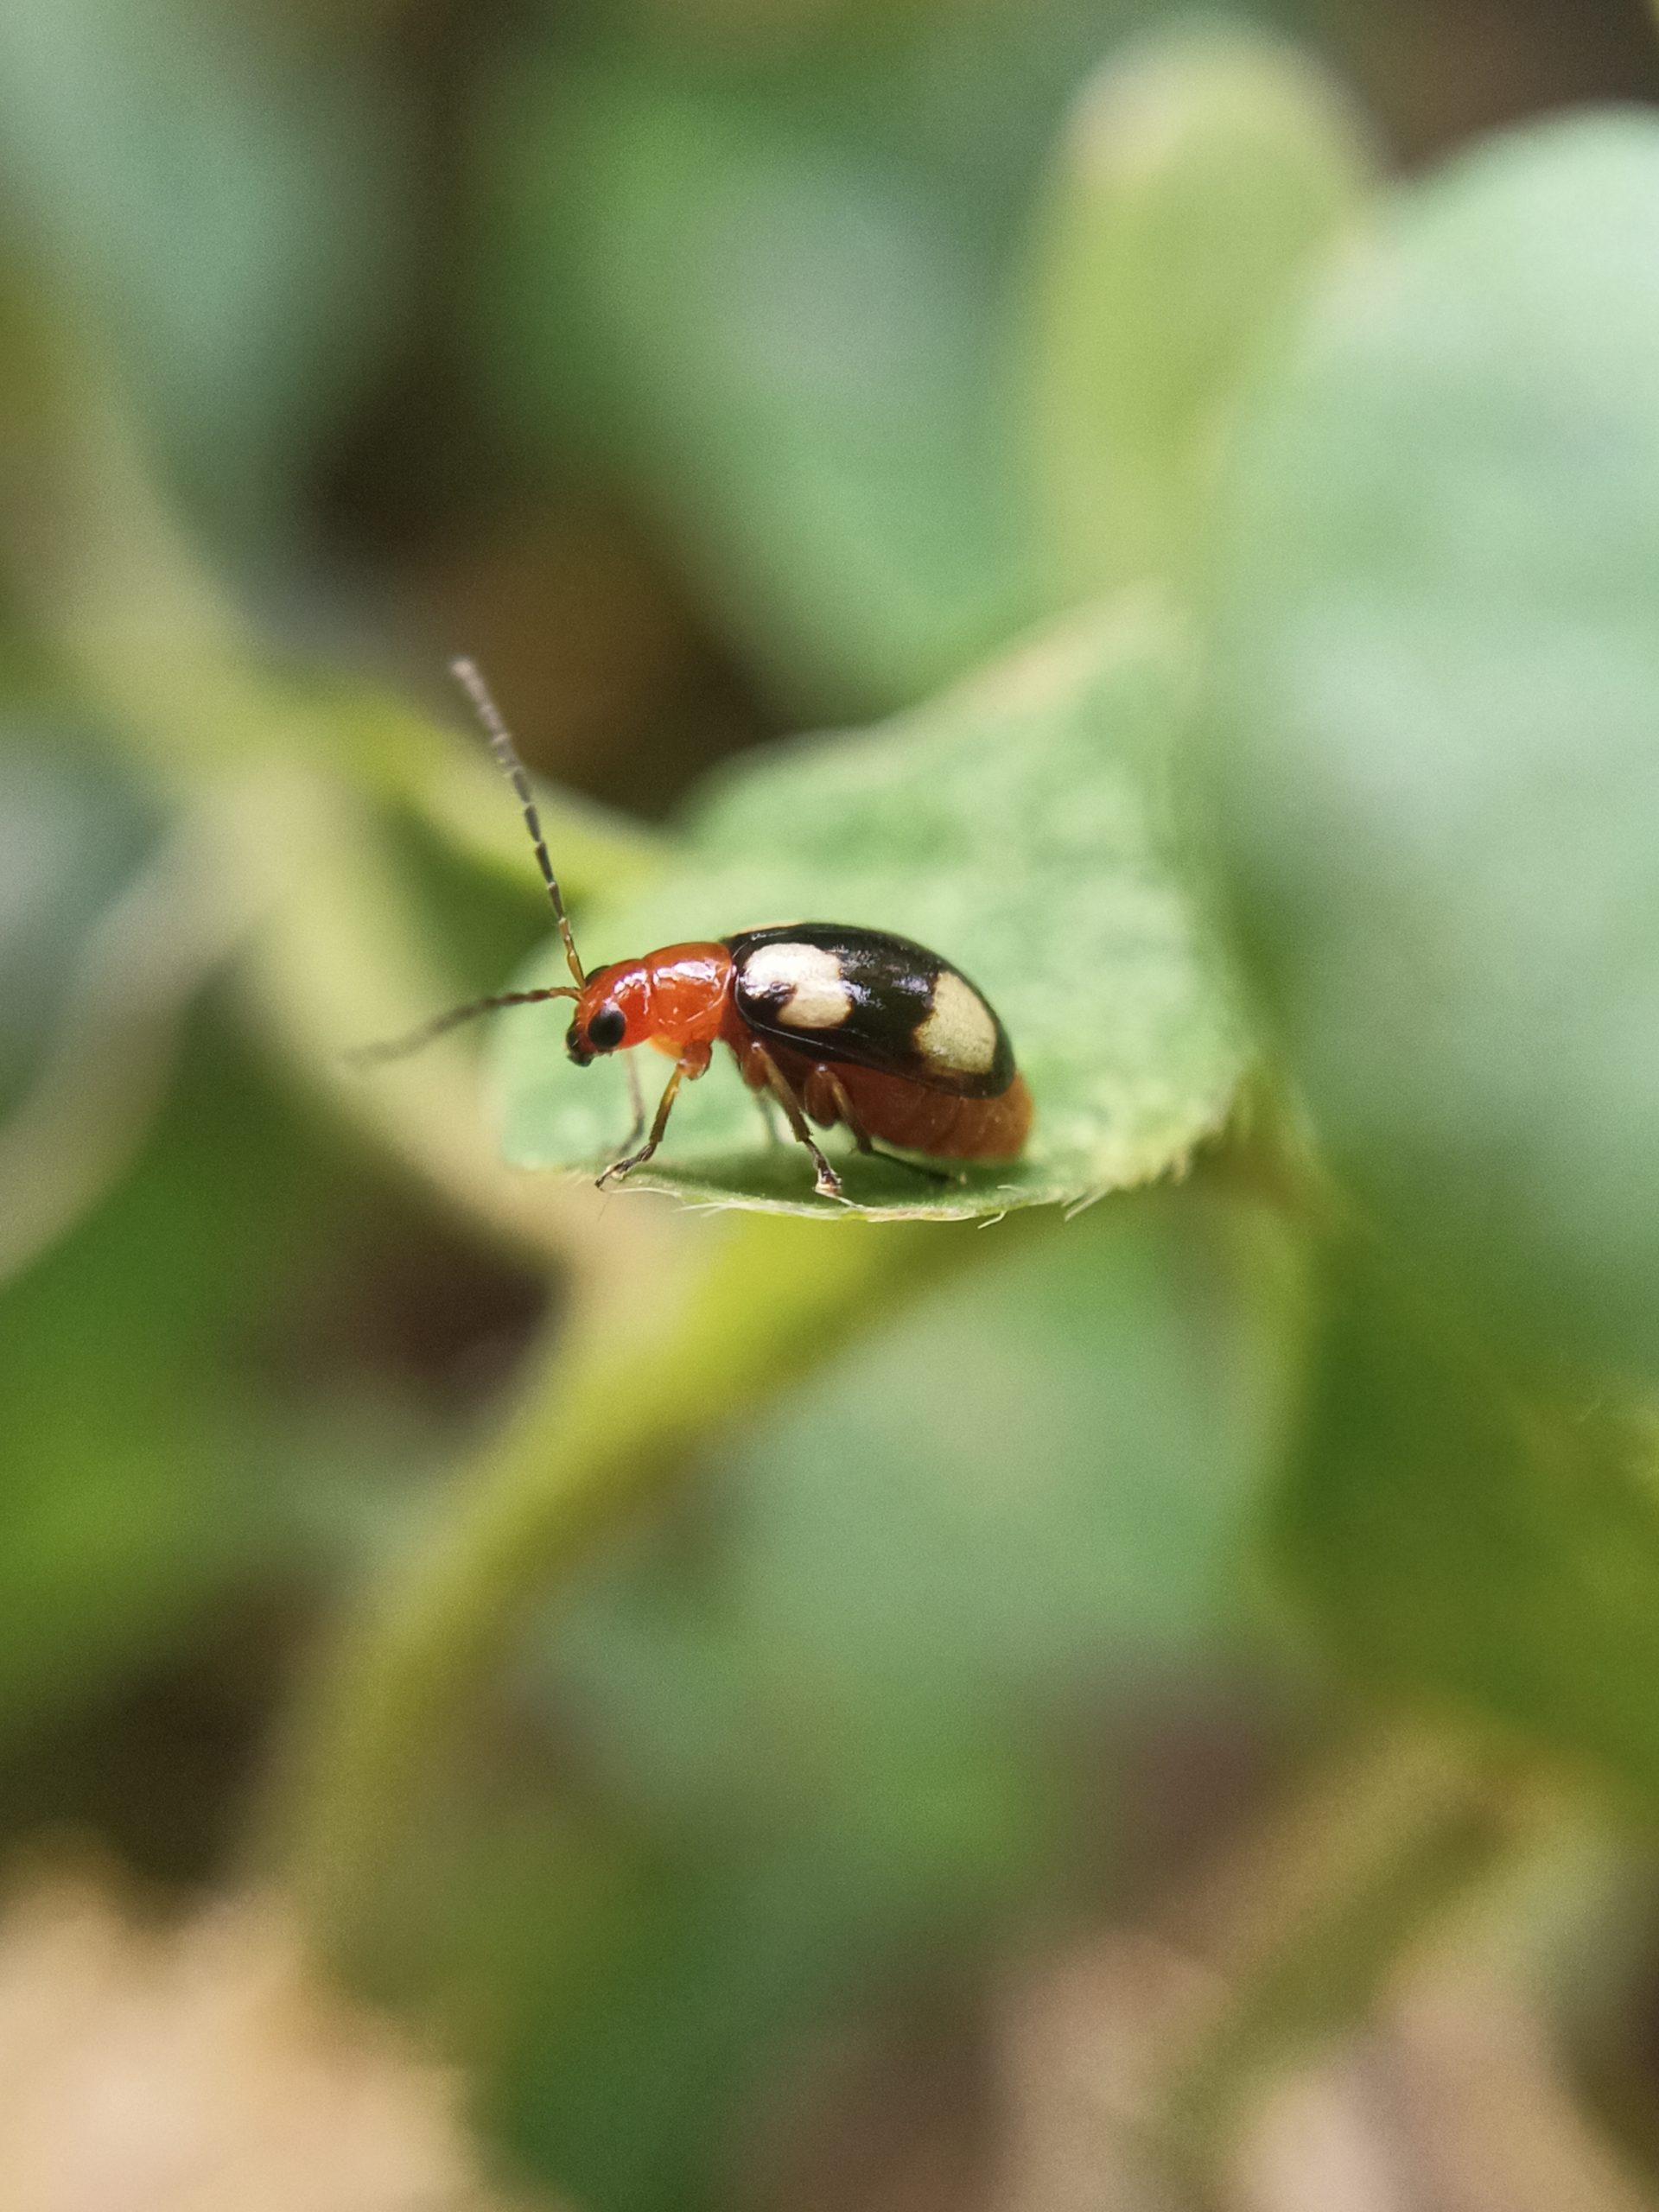 Red Bug on the plant leaf